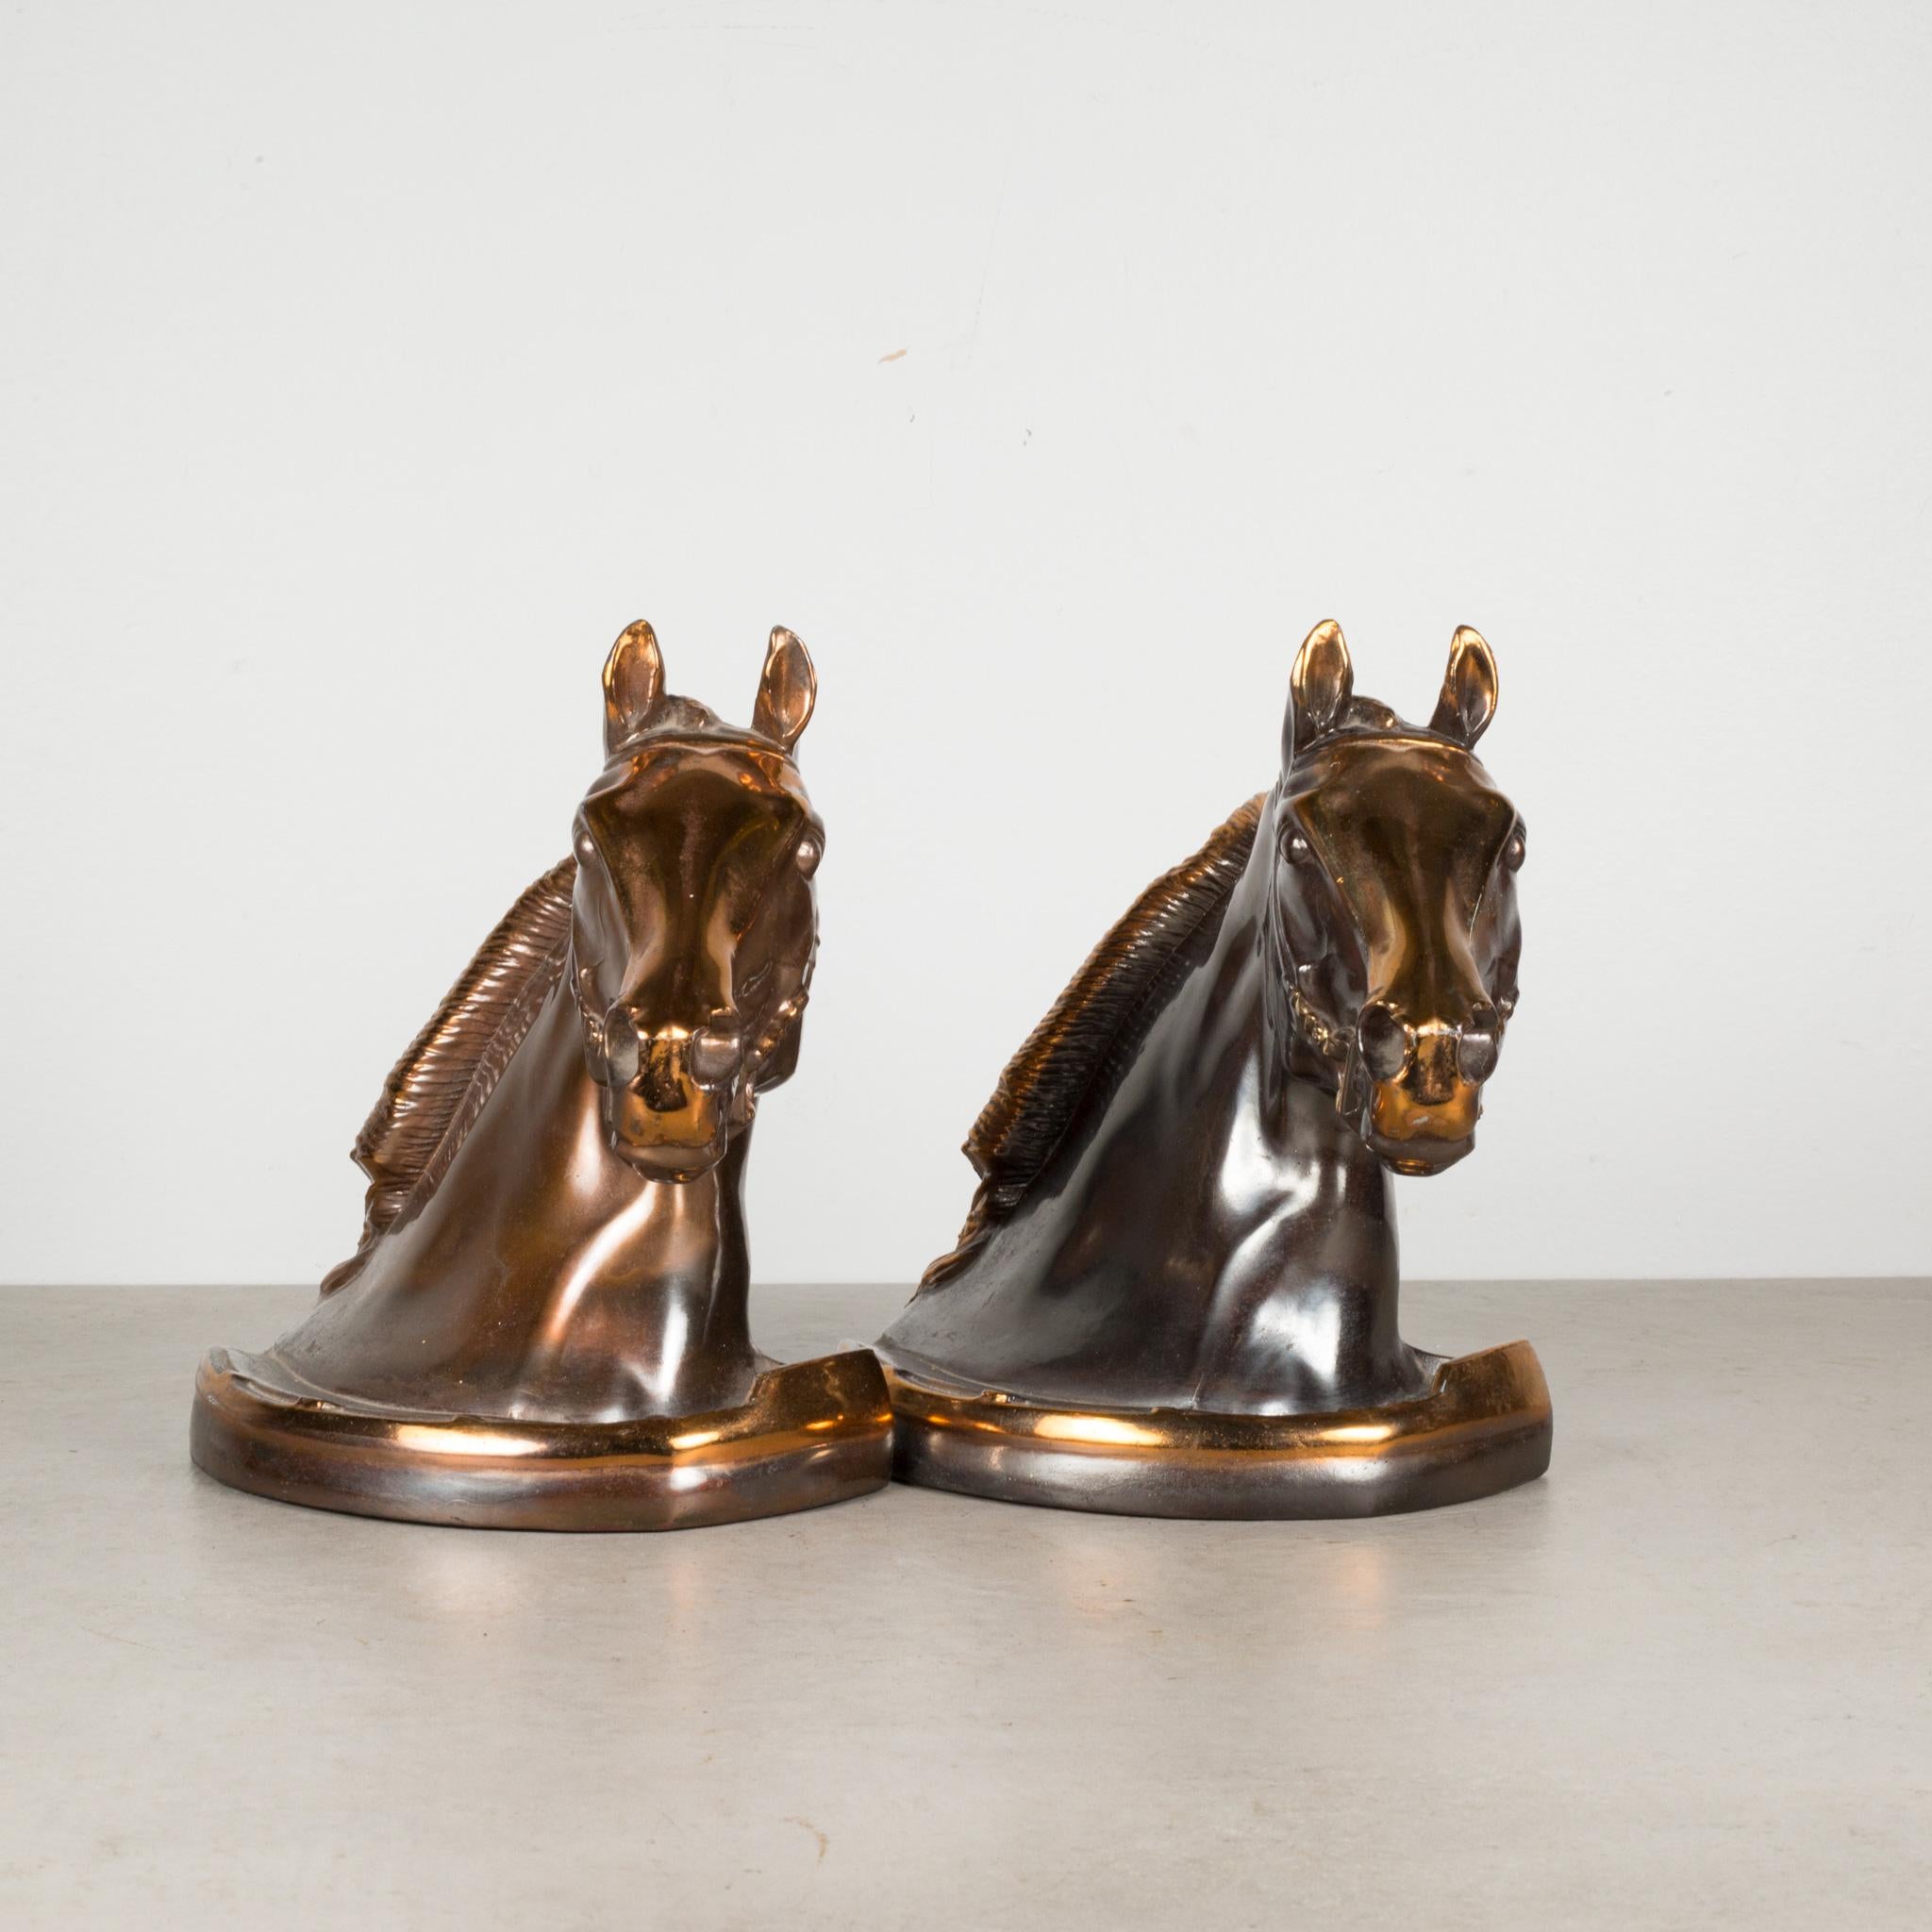 20th Century Bronze Plated Horse Head Bookends by Glady's Brown and Dodge, c.1946